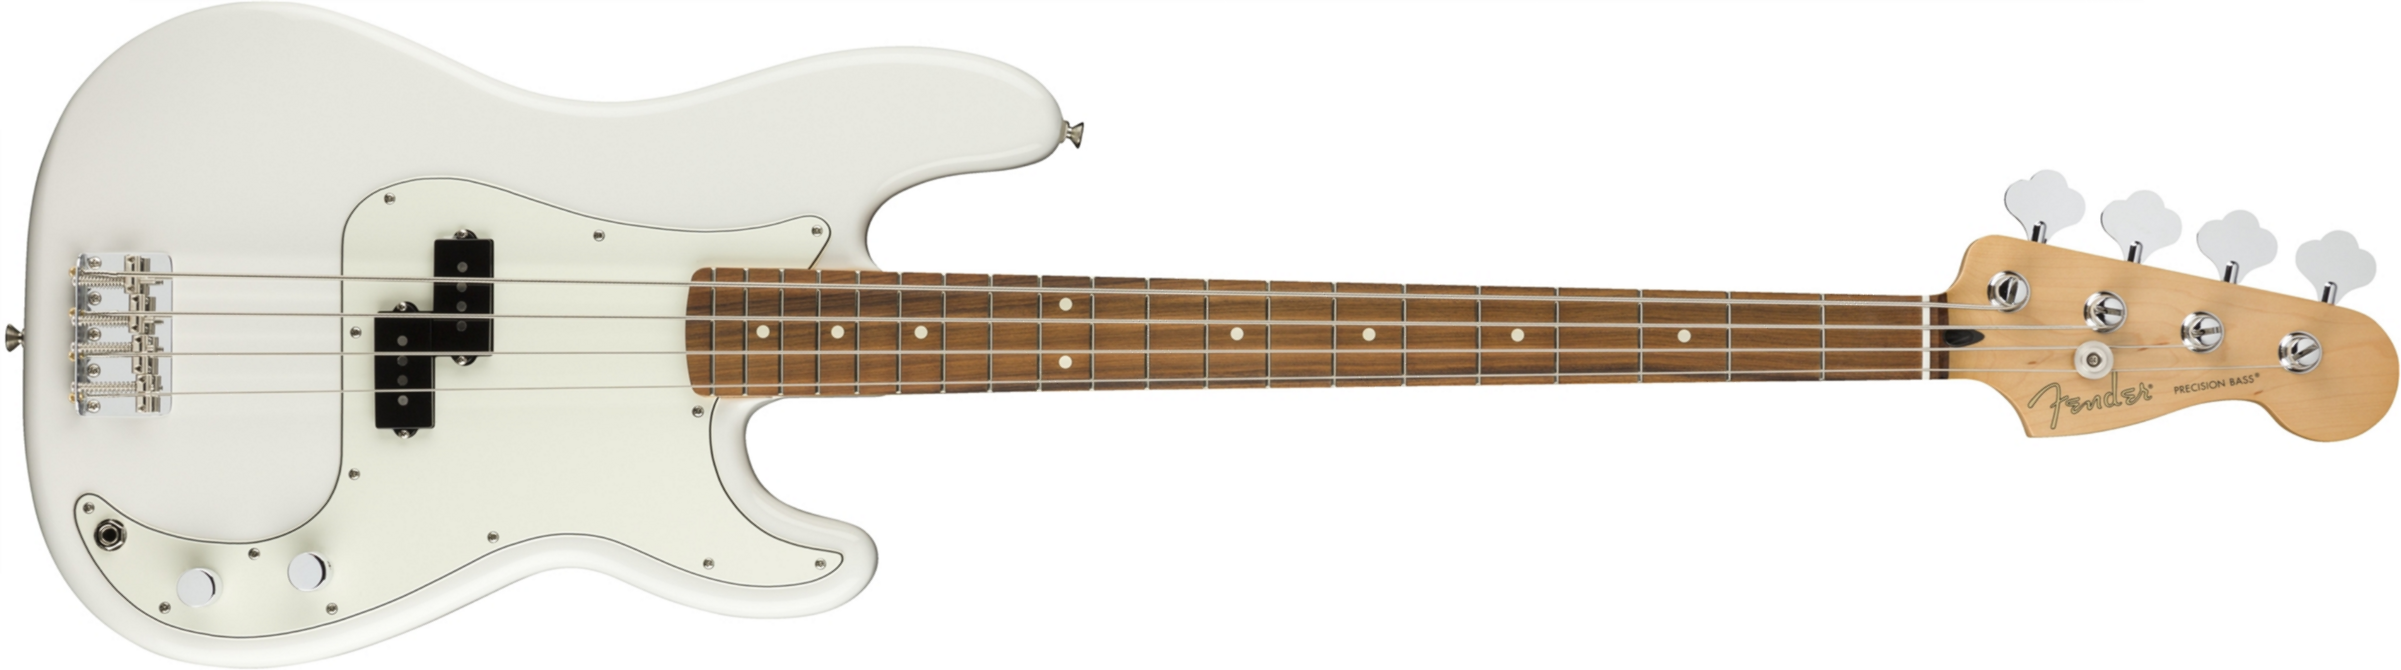 Fender Precision Bass Player Mex Pf - Polar White - Solid body electric bass - Main picture